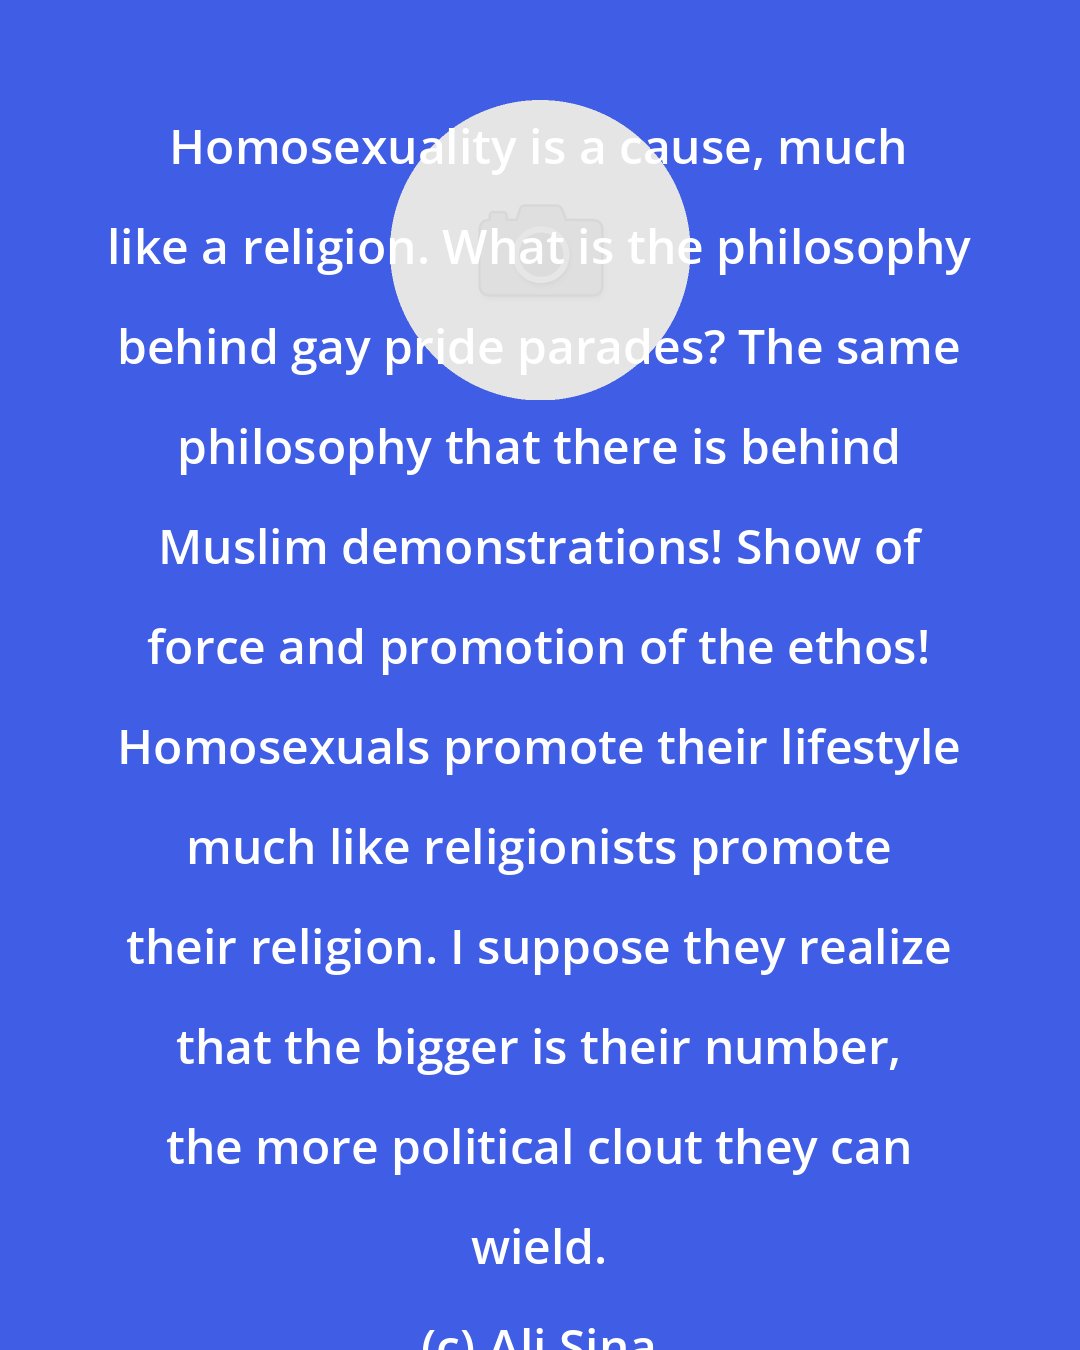 Ali Sina: Homosexuality is a cause, much like a religion. What is the philosophy behind gay pride parades? The same philosophy that there is behind Muslim demonstrations! Show of force and promotion of the ethos! Homosexuals promote their lifestyle much like religionists promote their religion. I suppose they realize that the bigger is their number, the more political clout they can wield.